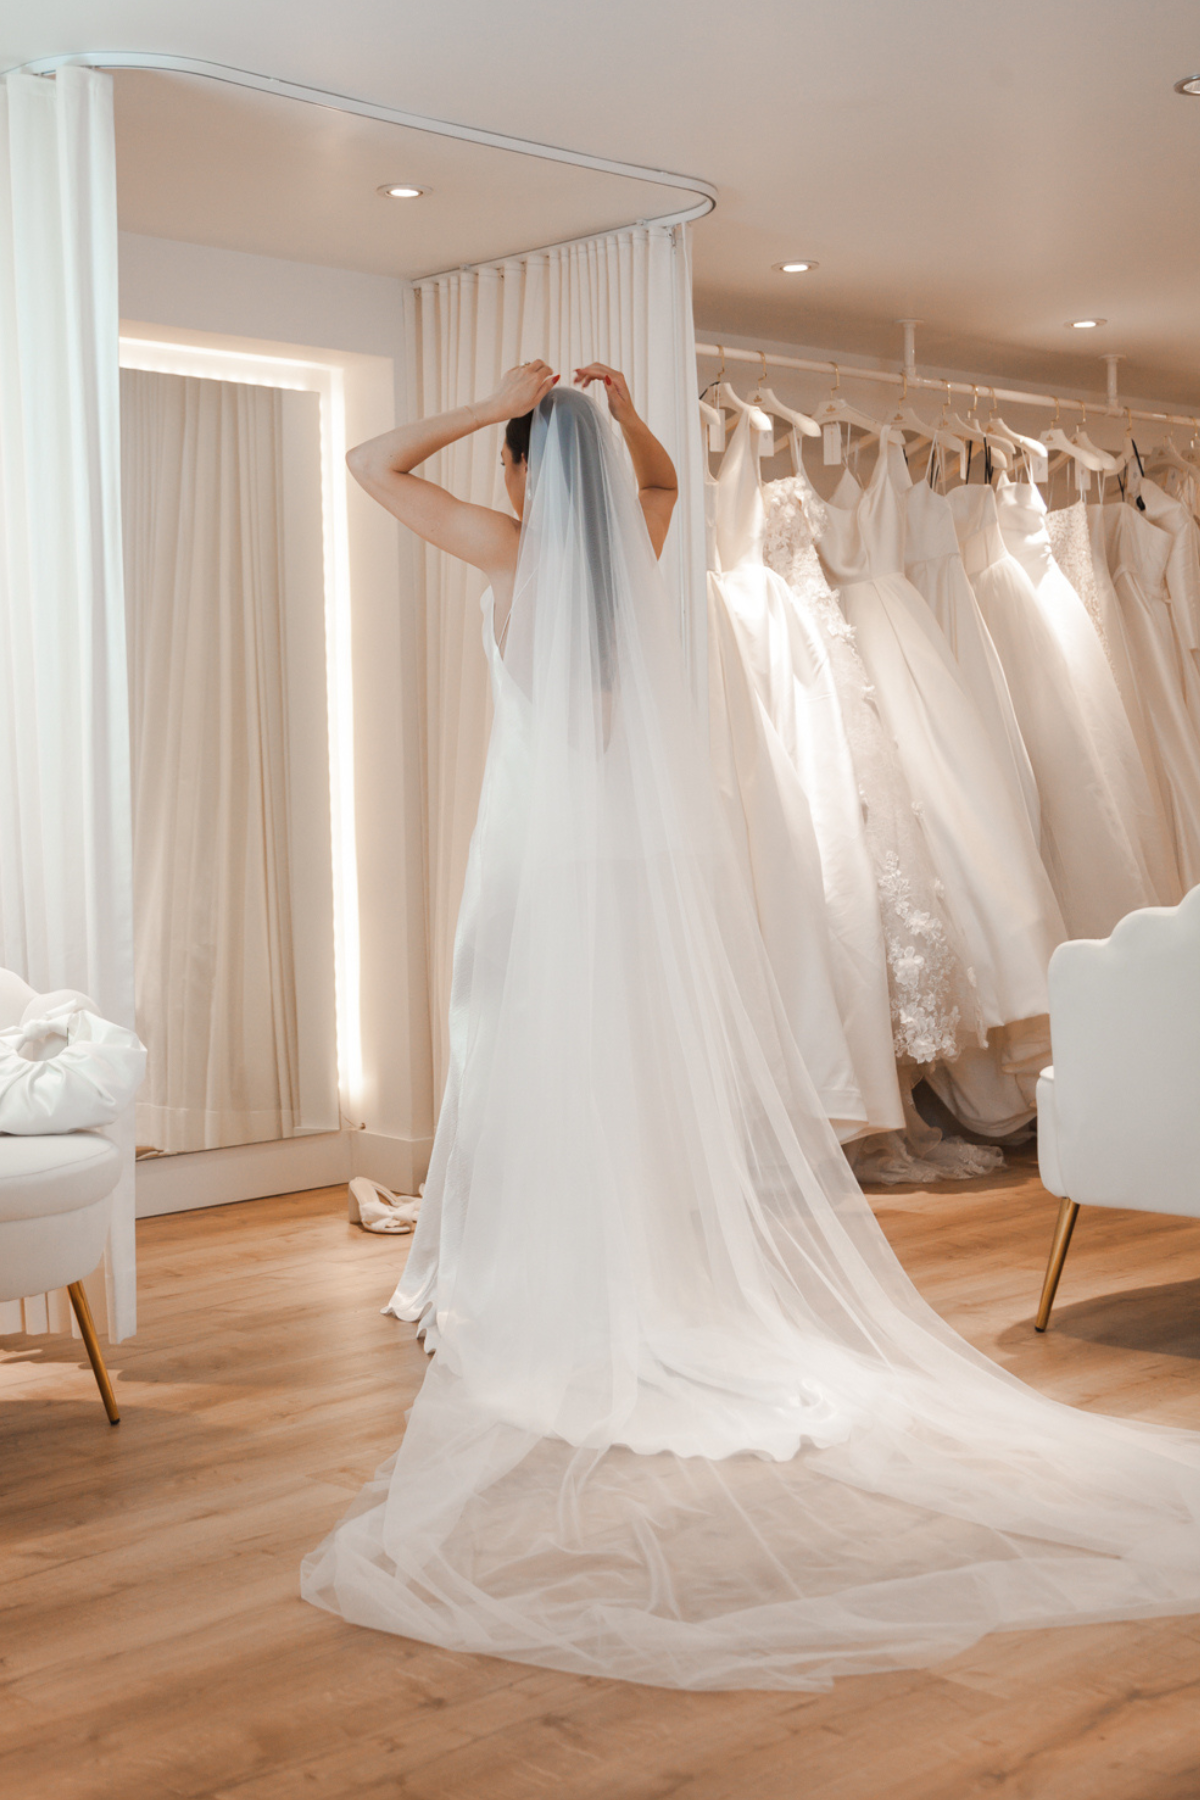 Classic tulle veil with long blusher